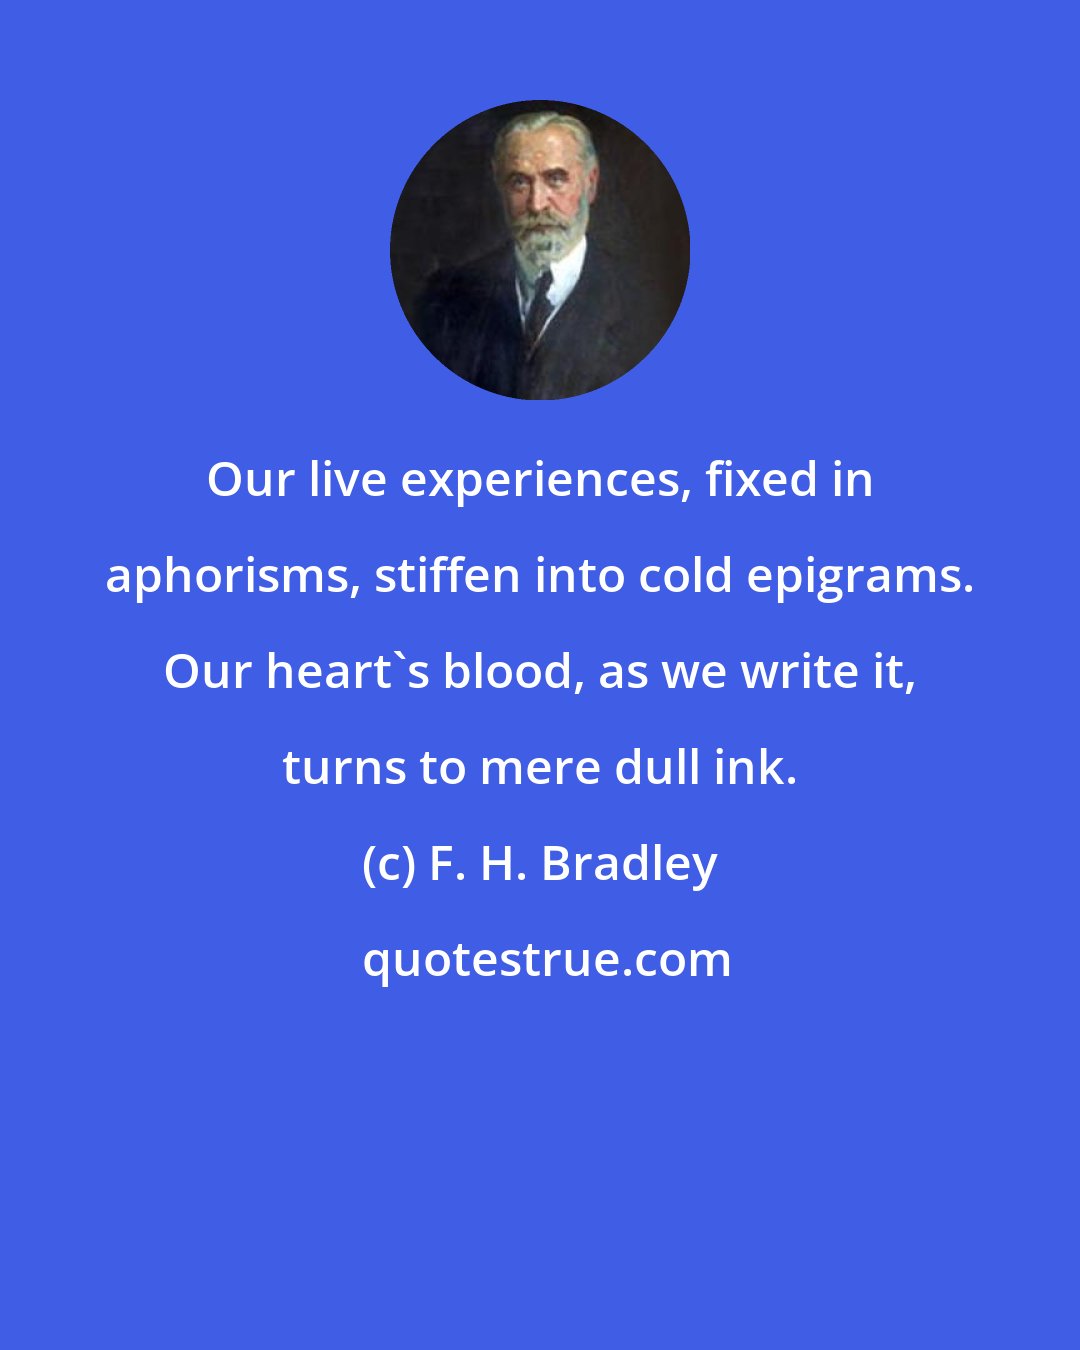 F. H. Bradley: Our live experiences, fixed in aphorisms, stiffen into cold epigrams. Our heart's blood, as we write it, turns to mere dull ink.